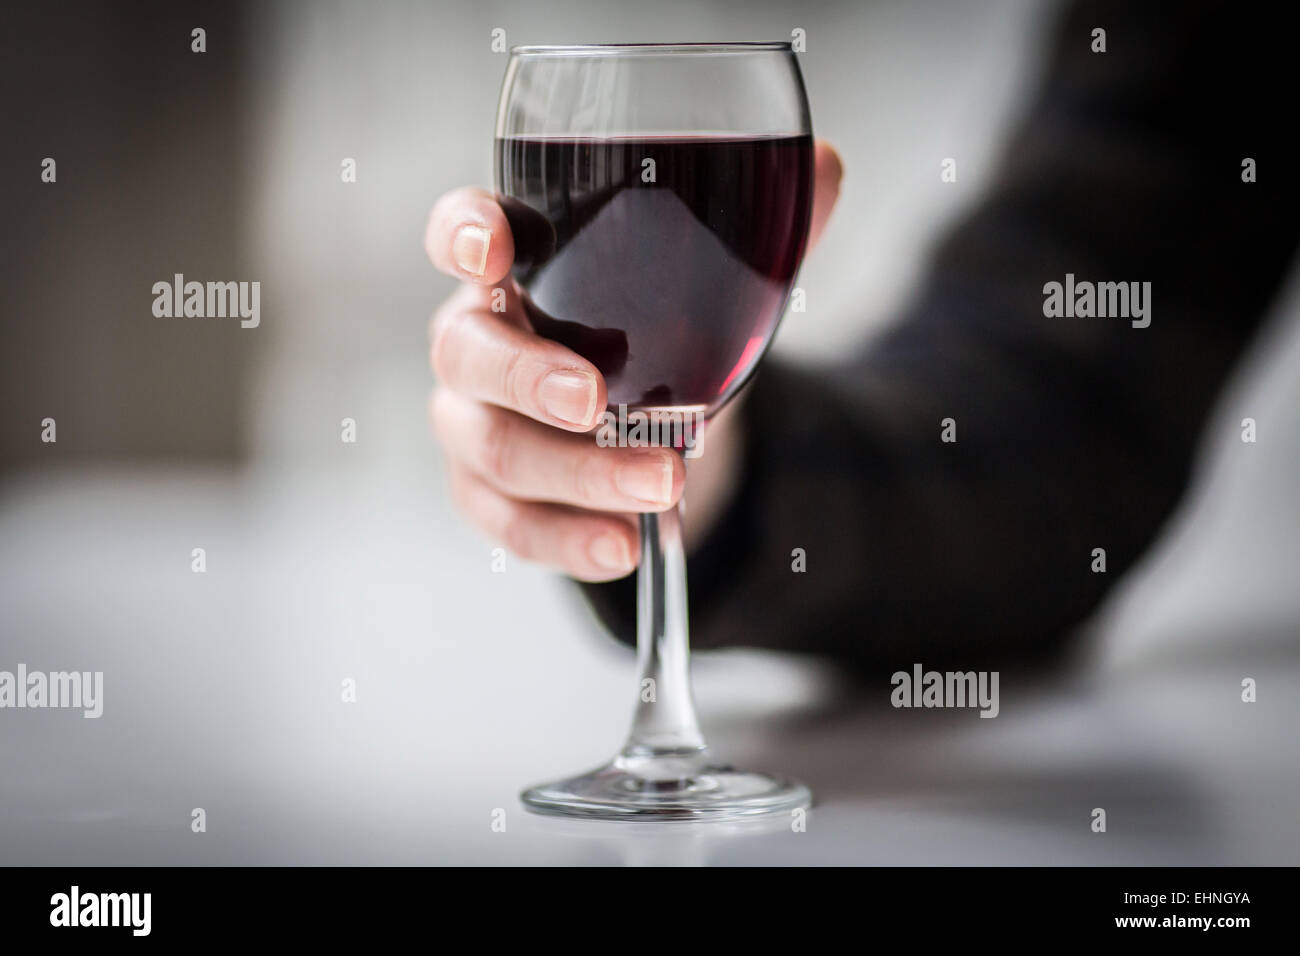 Woman holding a glass of red wine. Stock Photo